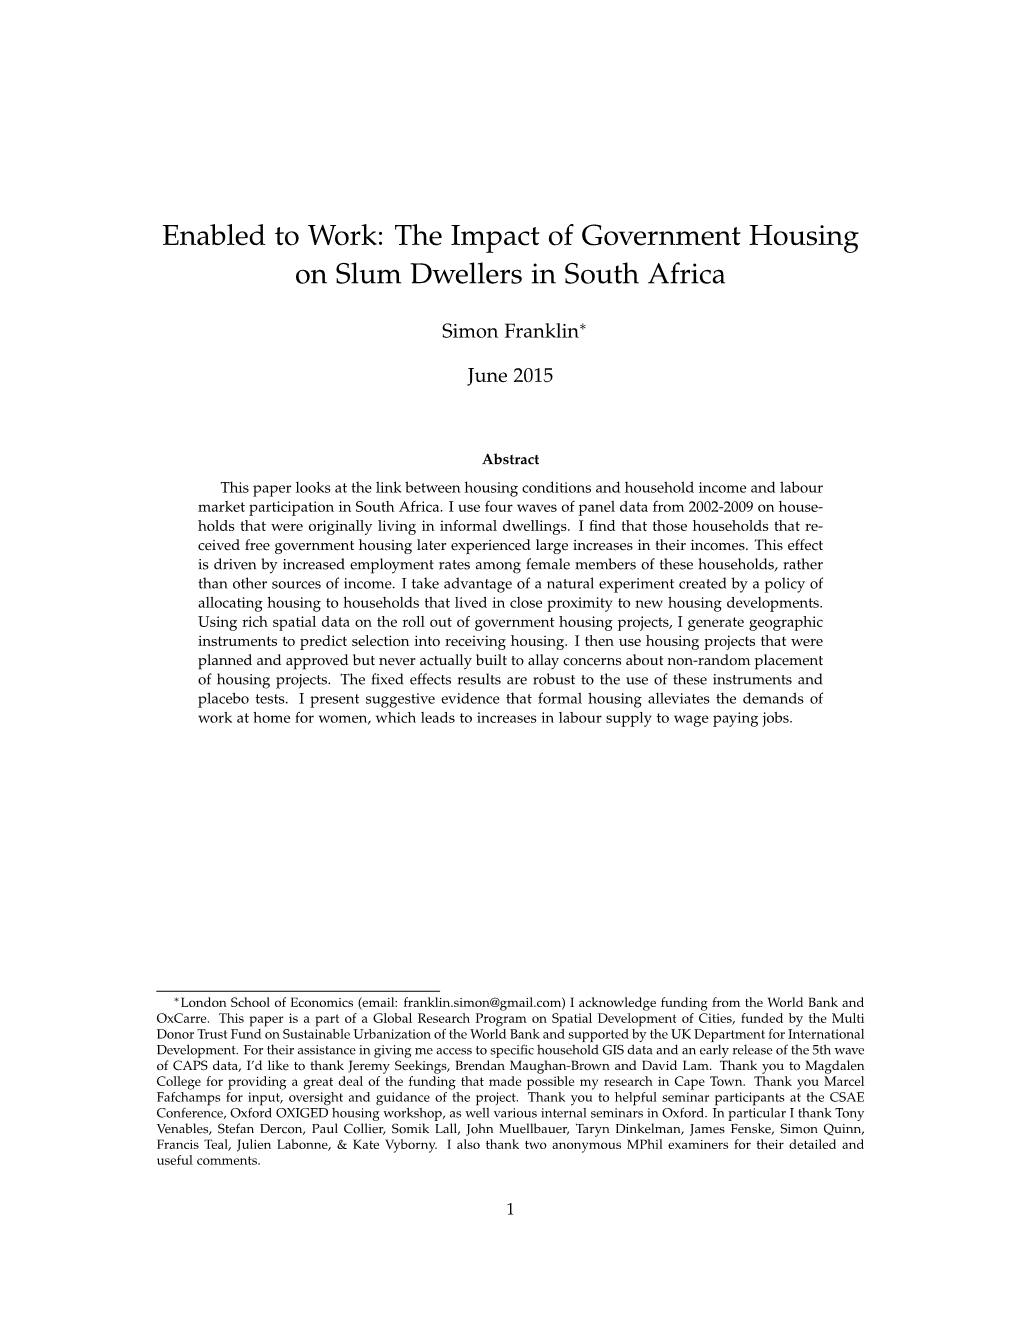 Enabled to Work: the Impact of Government Housing on Slum Dwellers in South Africa